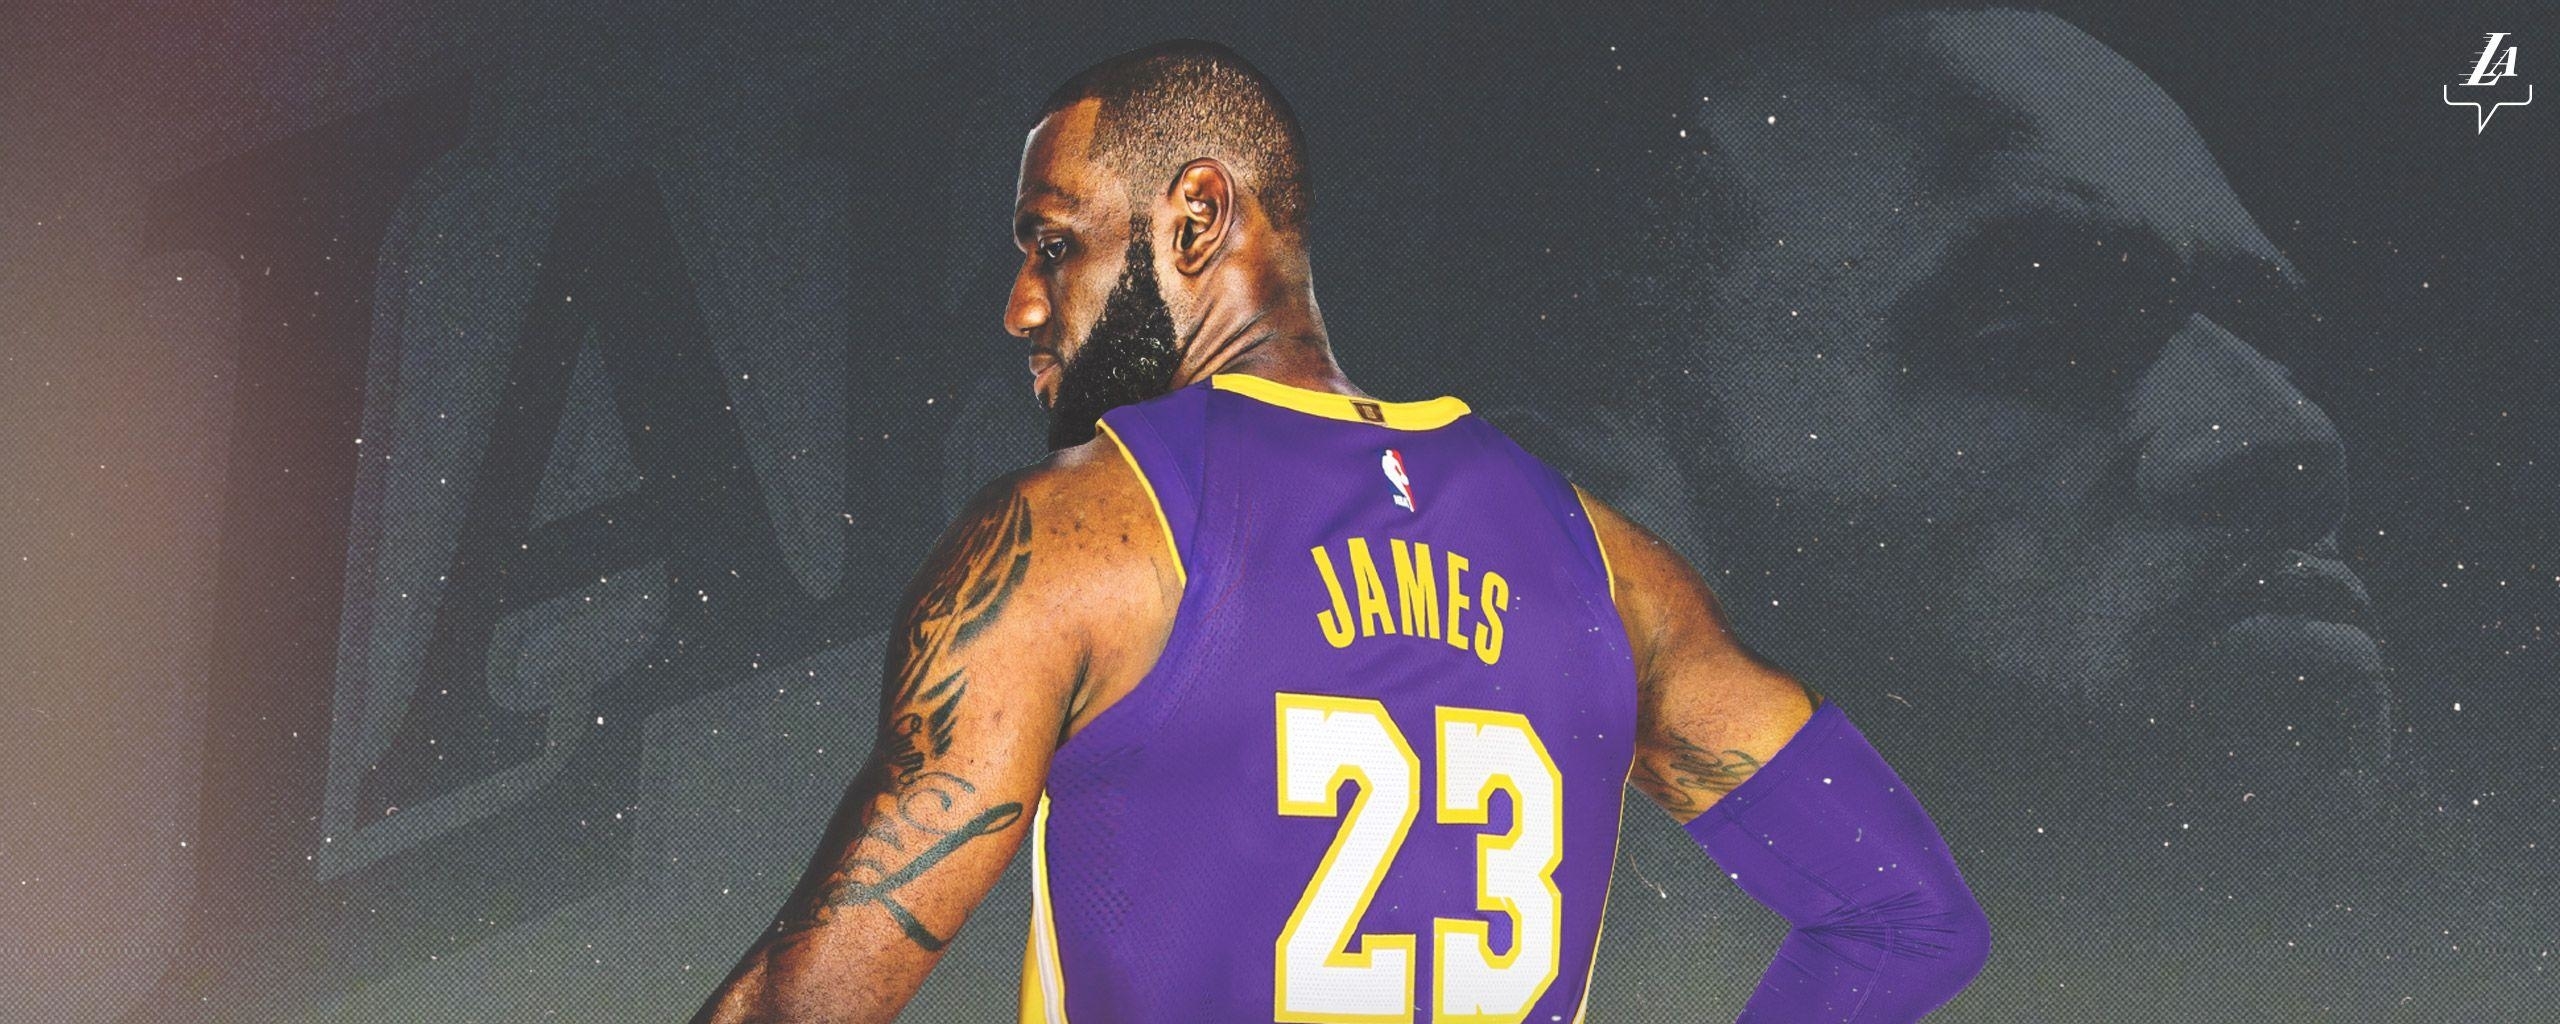 2560x1024 Lebron James 2021 2560x1024 Resolution Wallpaper Hd Sports 4k Wallpapers Images Photos And Background Wallpapers Den